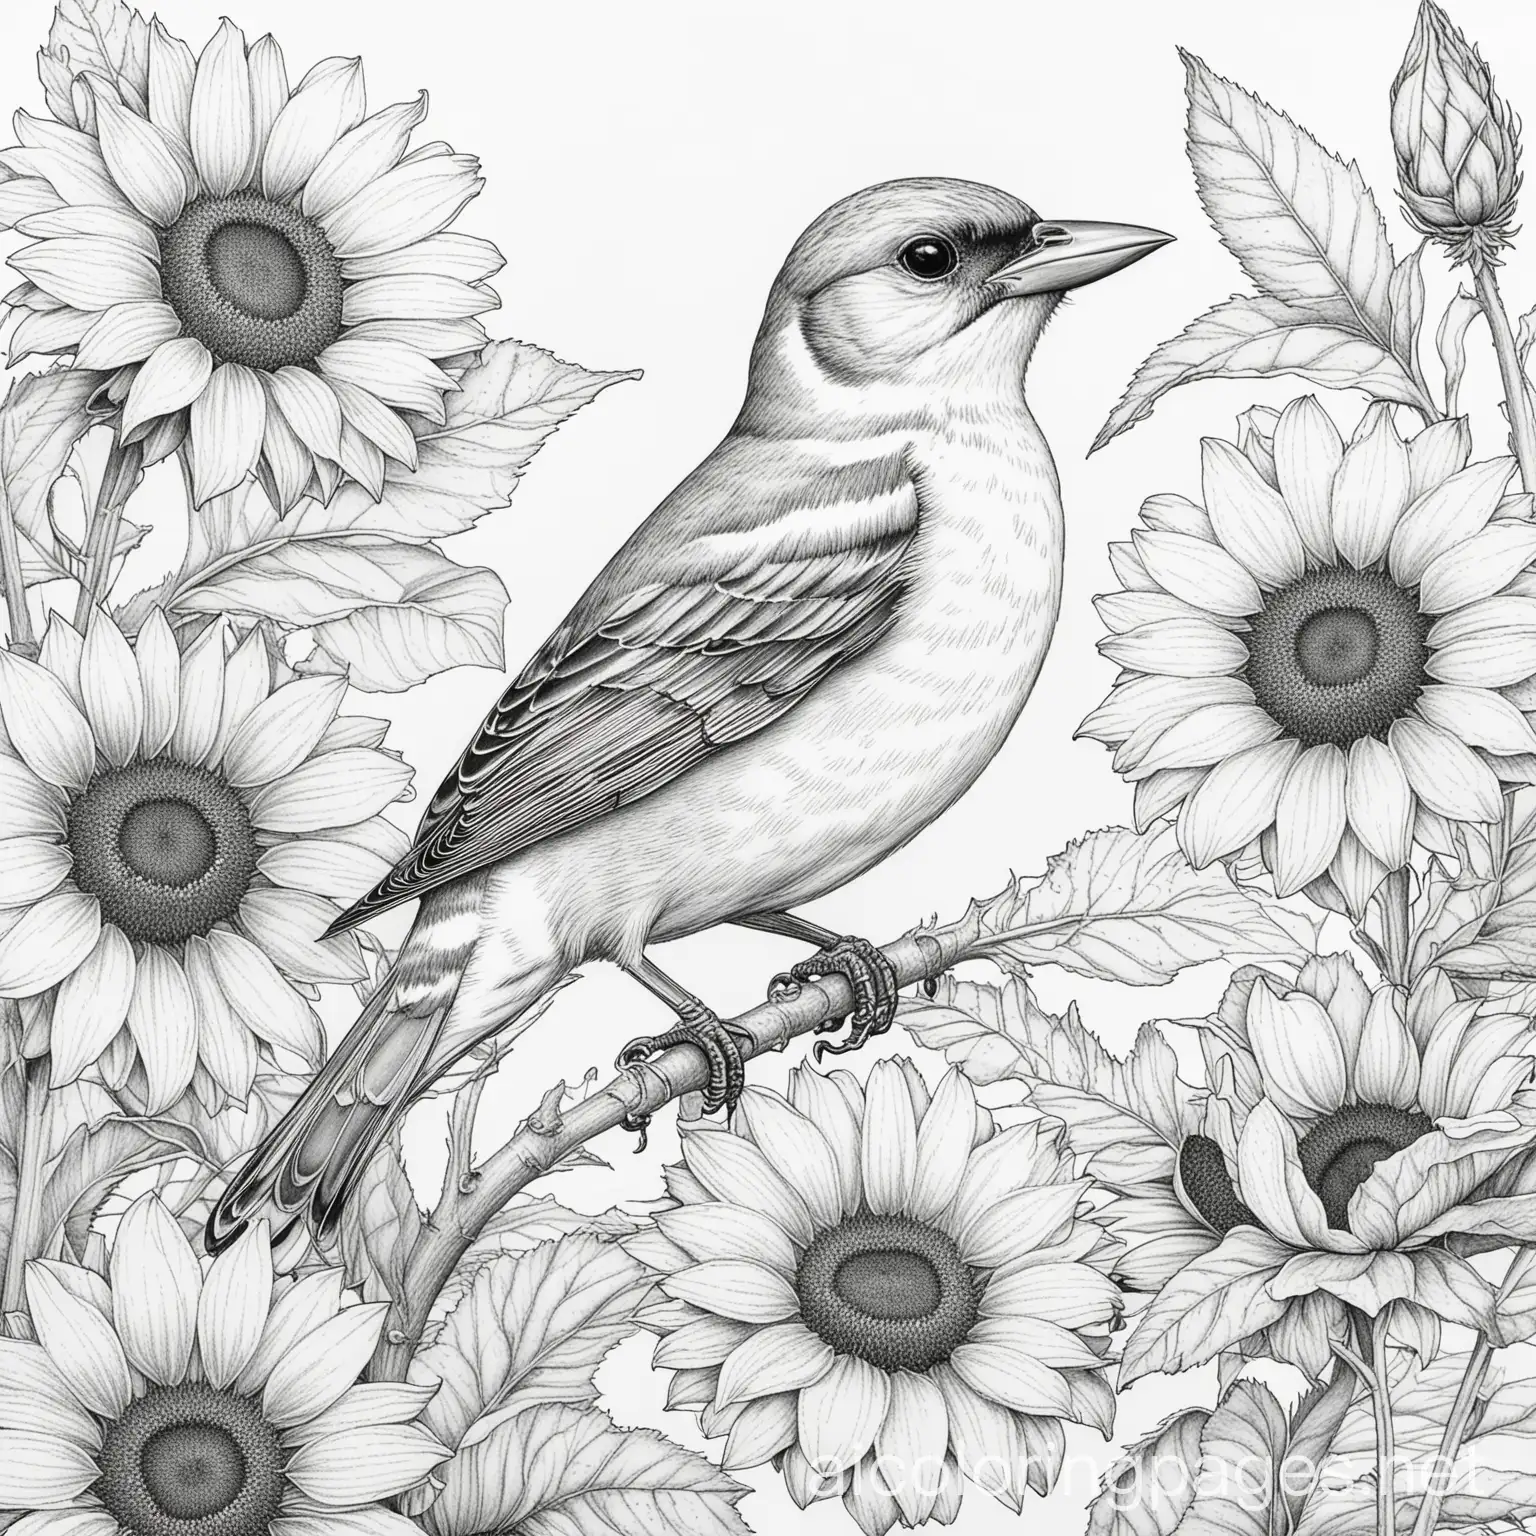 Baltimore Oriole with sunflowers and flowers
, Coloring Page, black and white, line art, white background, Simplicity, Ample White Space. The background of the coloring page is plain white to make it easy for young children to color within the lines. The outlines of all the subjects are easy to distinguish, making it simple for kids to color without too much difficulty